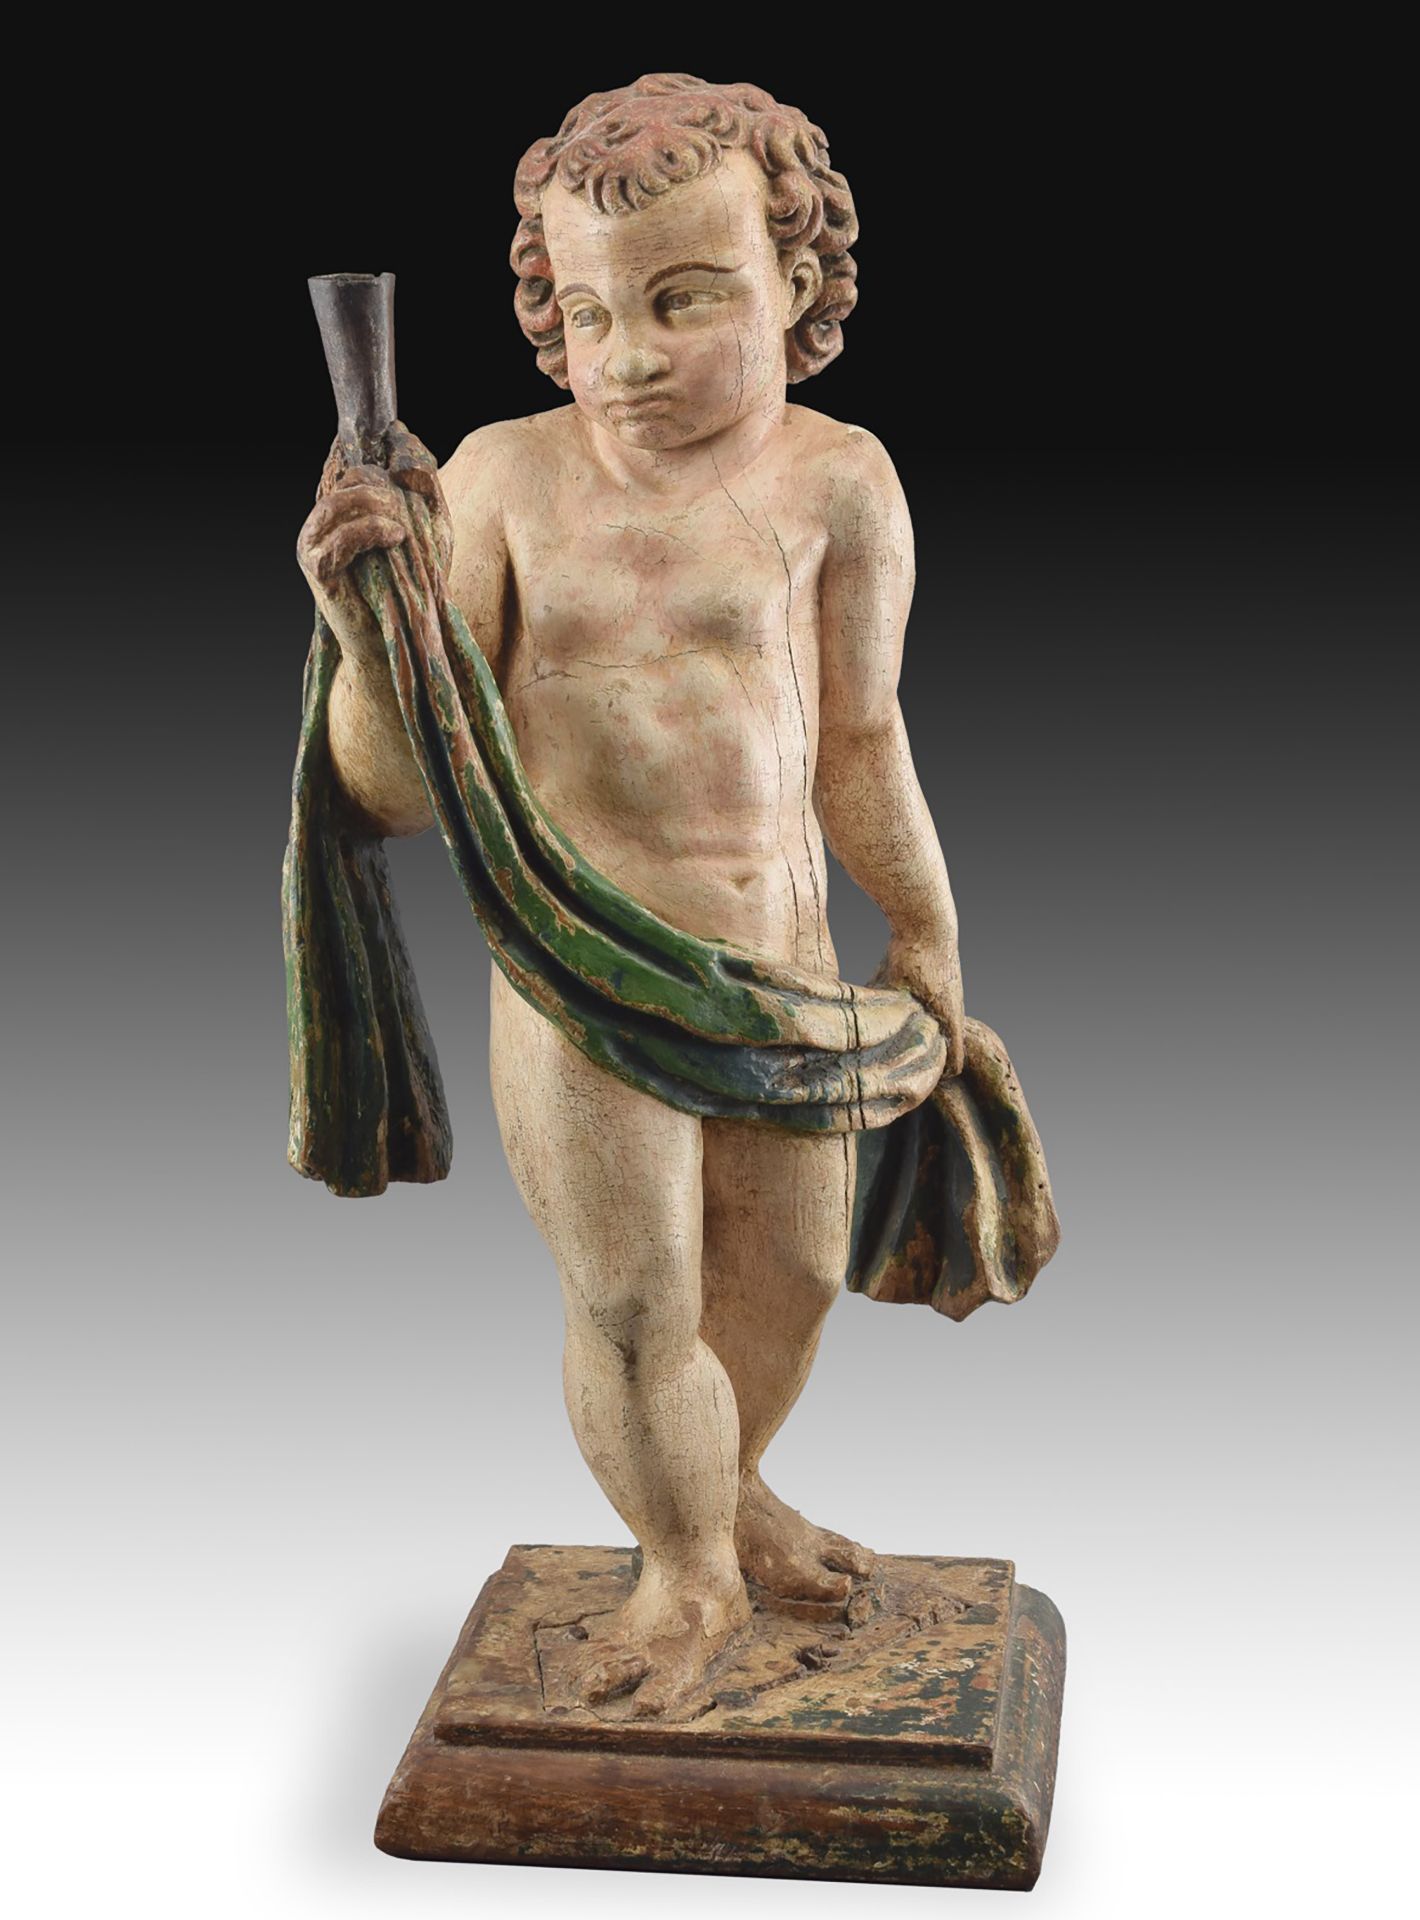 Romanist torchlighter from the 16th century - early 17th century